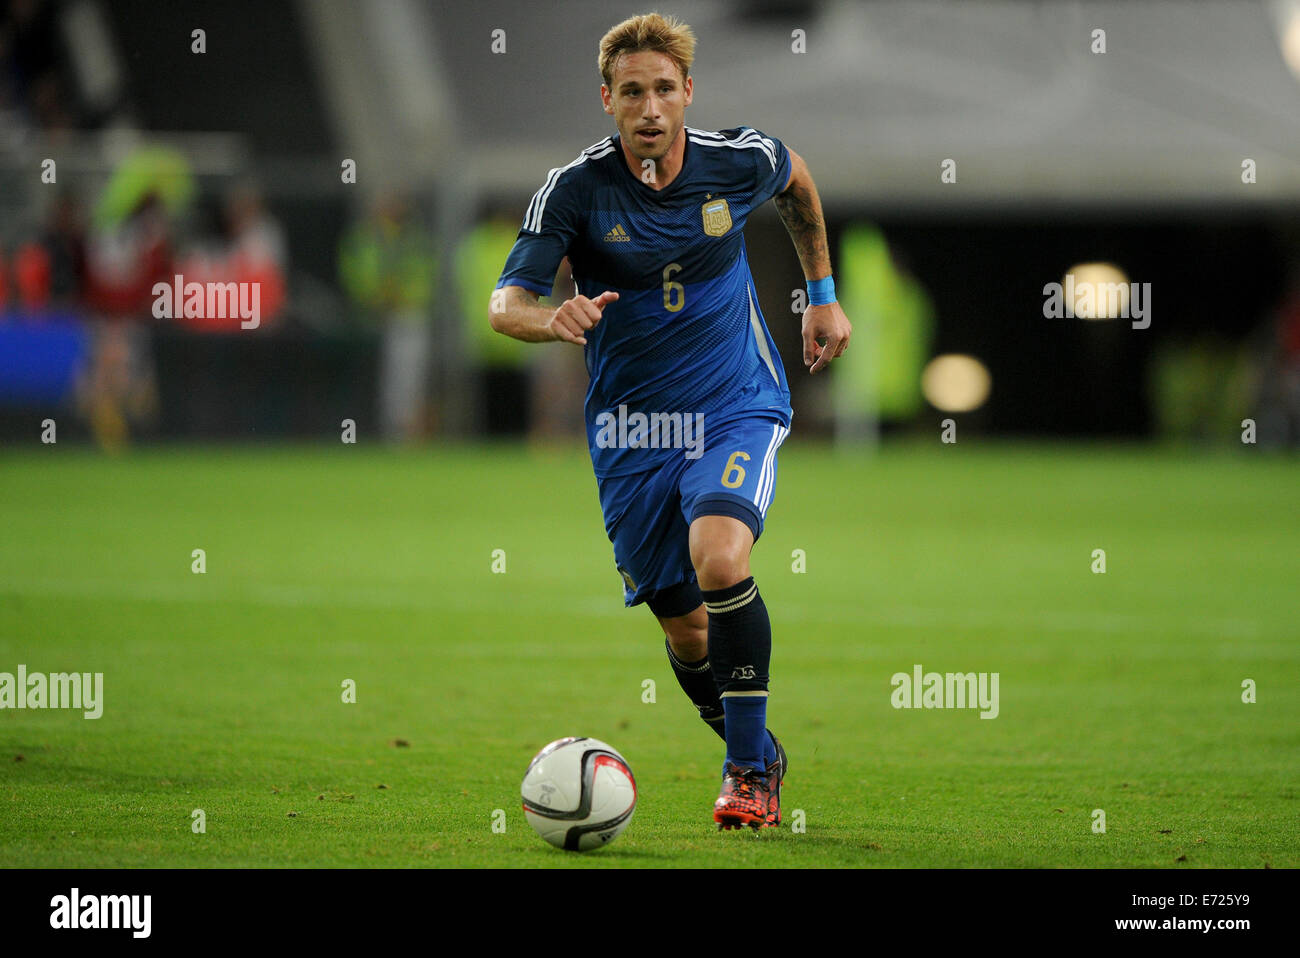 Esprit Arena, Duesseldorf, Germany. 3rd Sep, 2014. Argentina's Lucas Biglia plays the ball during the soccer friendly between Germany and Argentina at Esprit Arena, Duesseldorf, Germany, 3 September 2014. Photo: Jonas Guettler/dpa/Alamy Live News Stock Photo